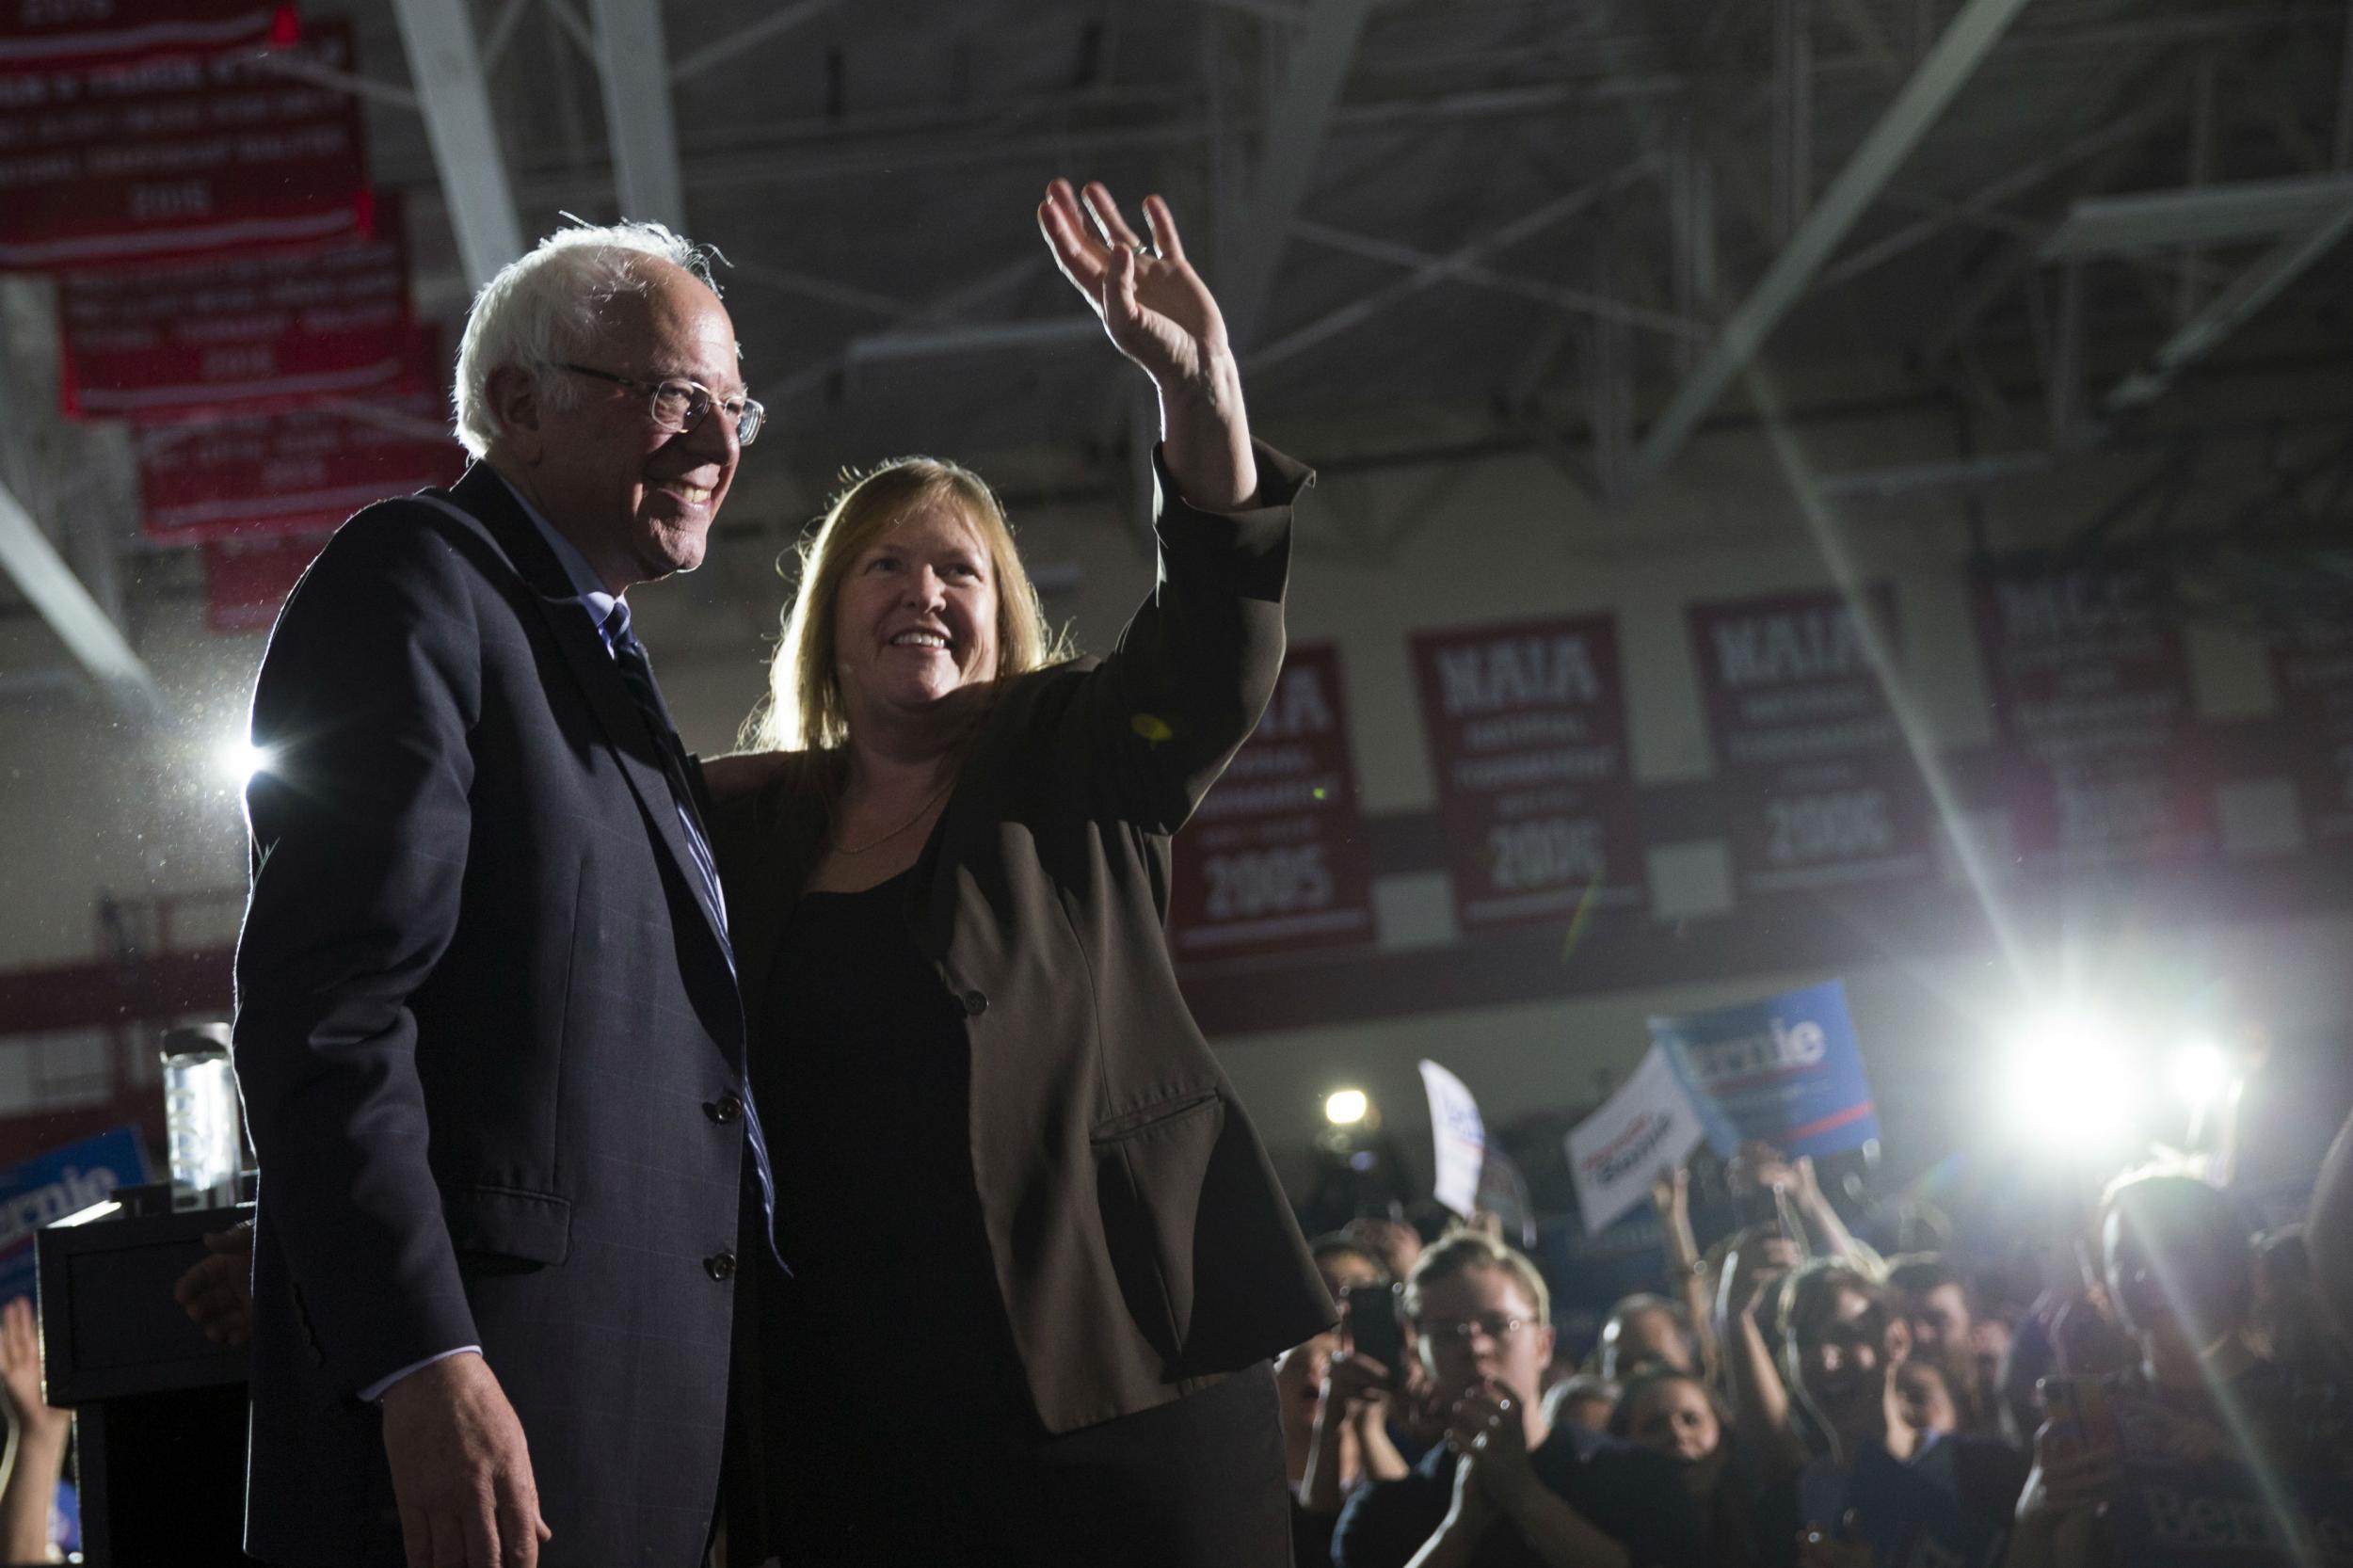 Jane Sanders has appeared at her husband's rallies